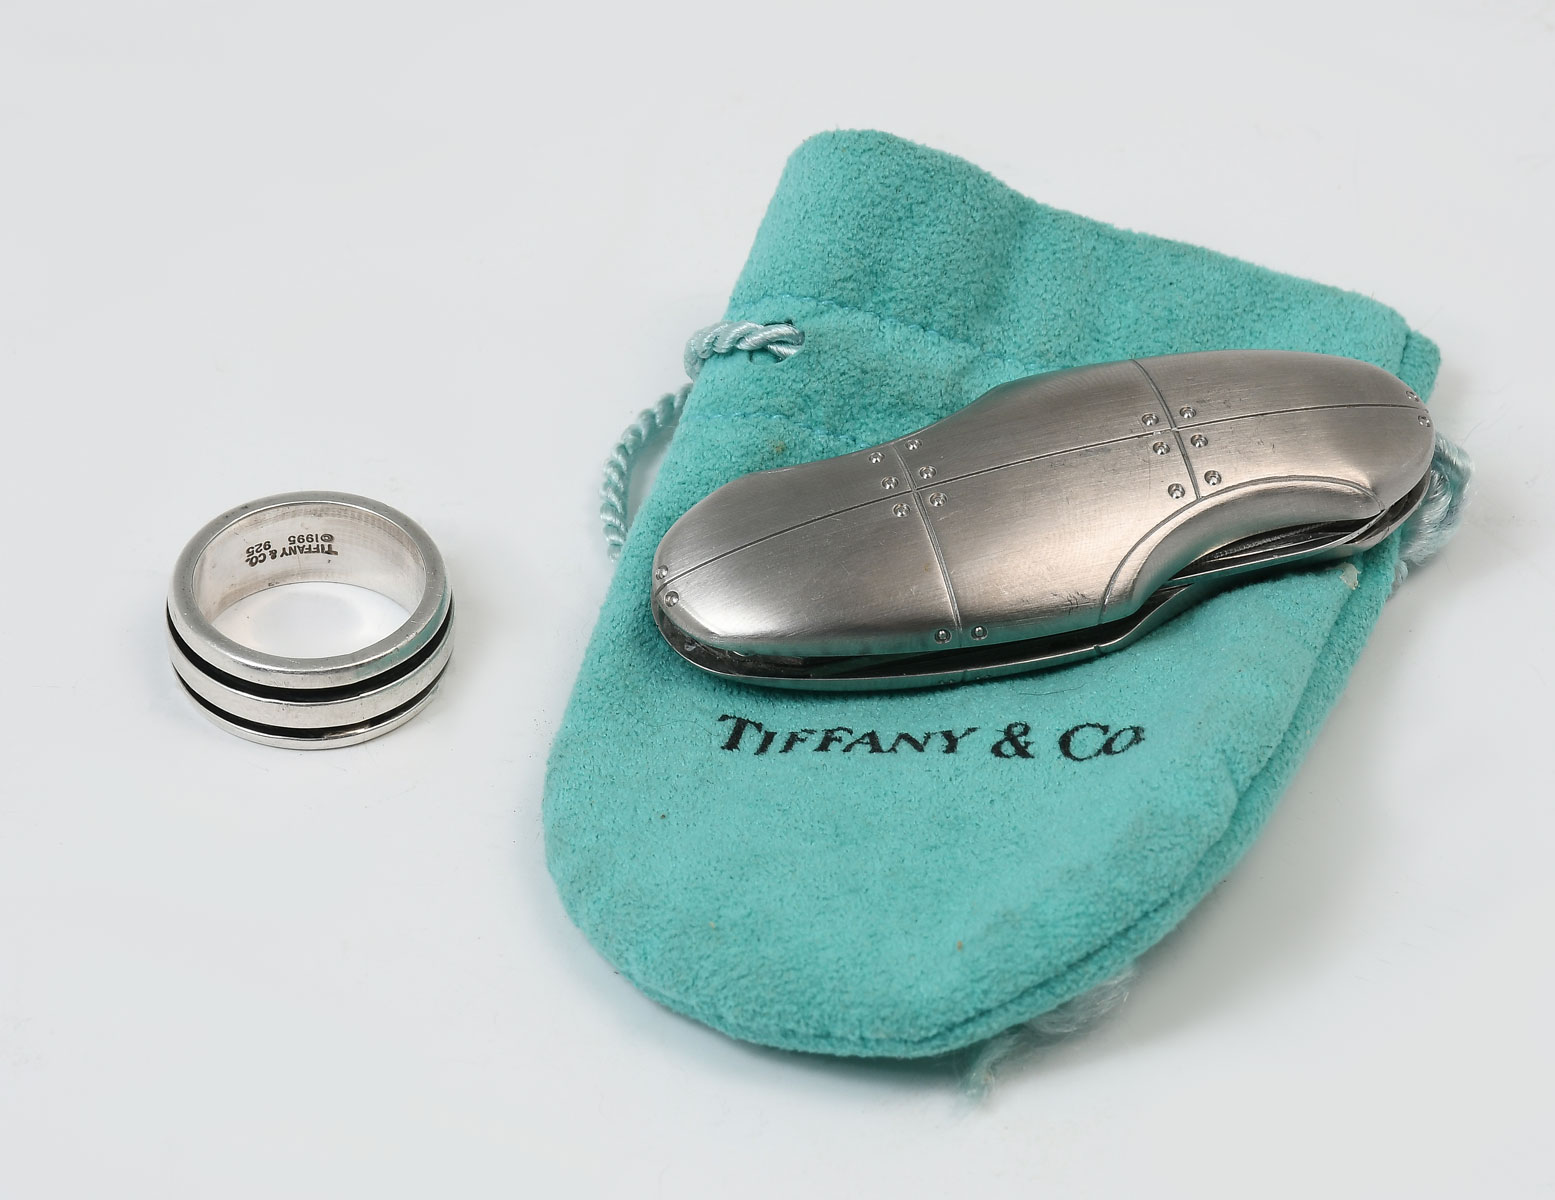 TIFFANY & CO - STERLING BAND AND